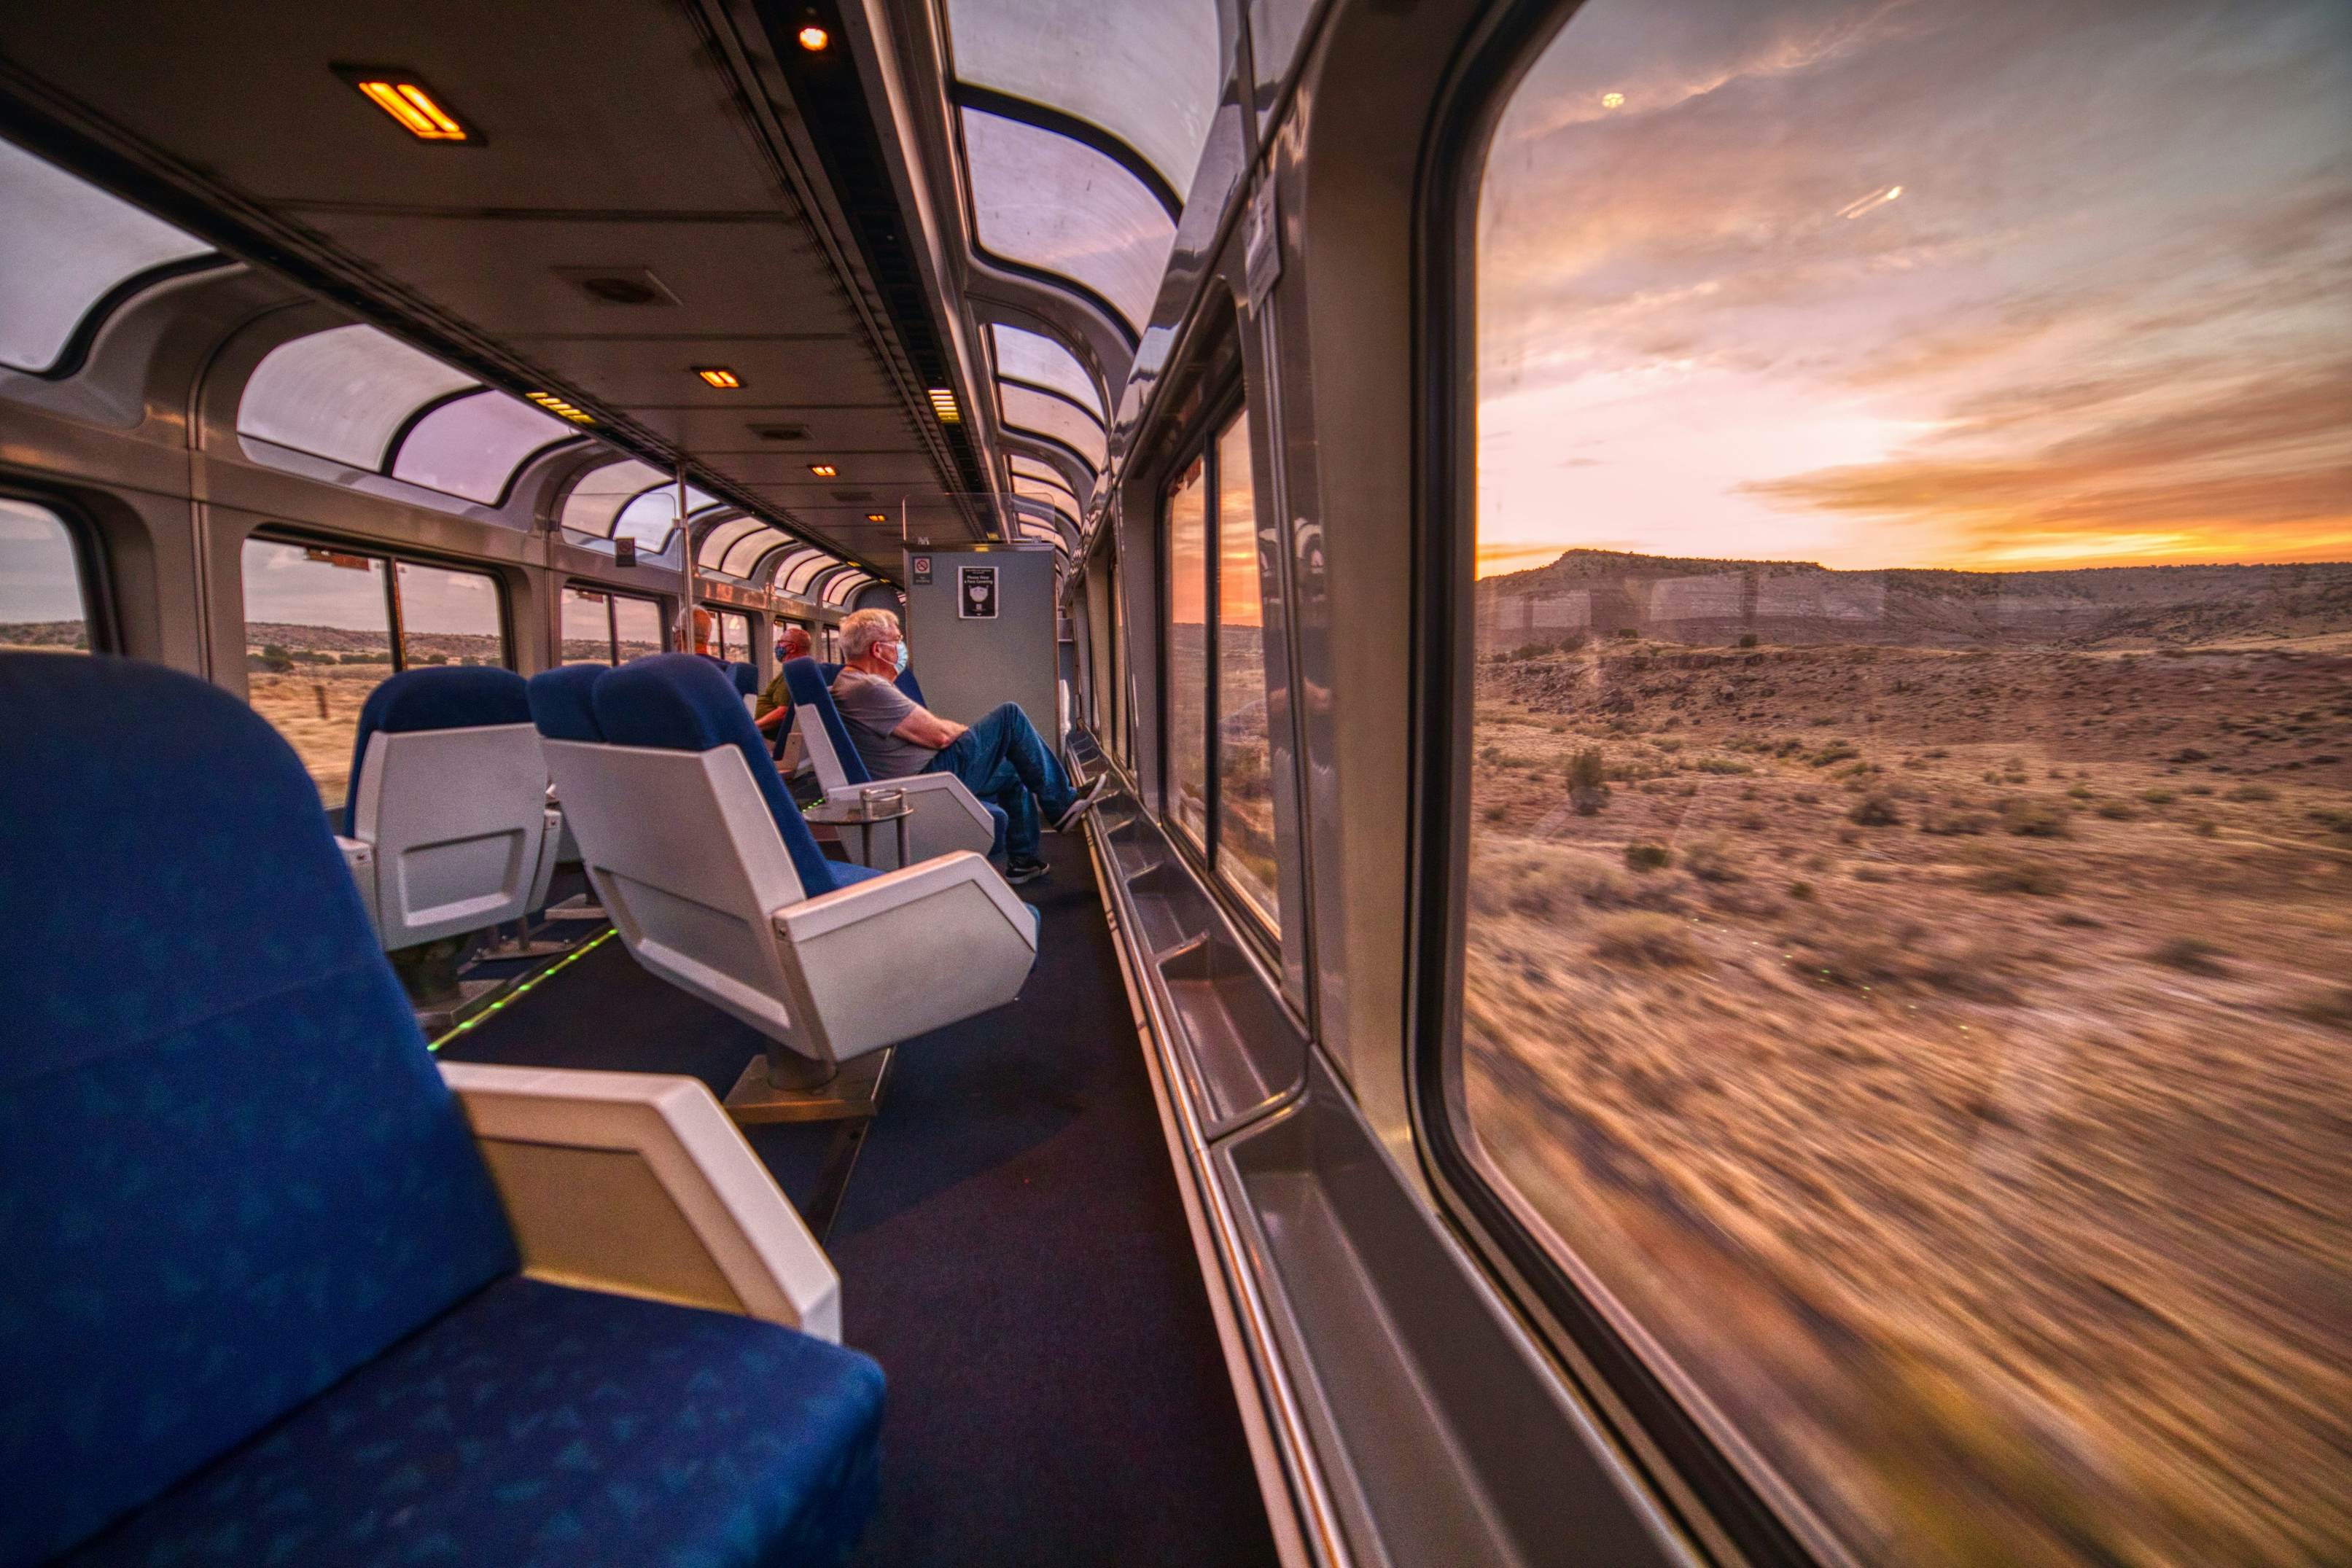 Amtrak Coast Starlight: 15 Things You Need To Know Before Riding